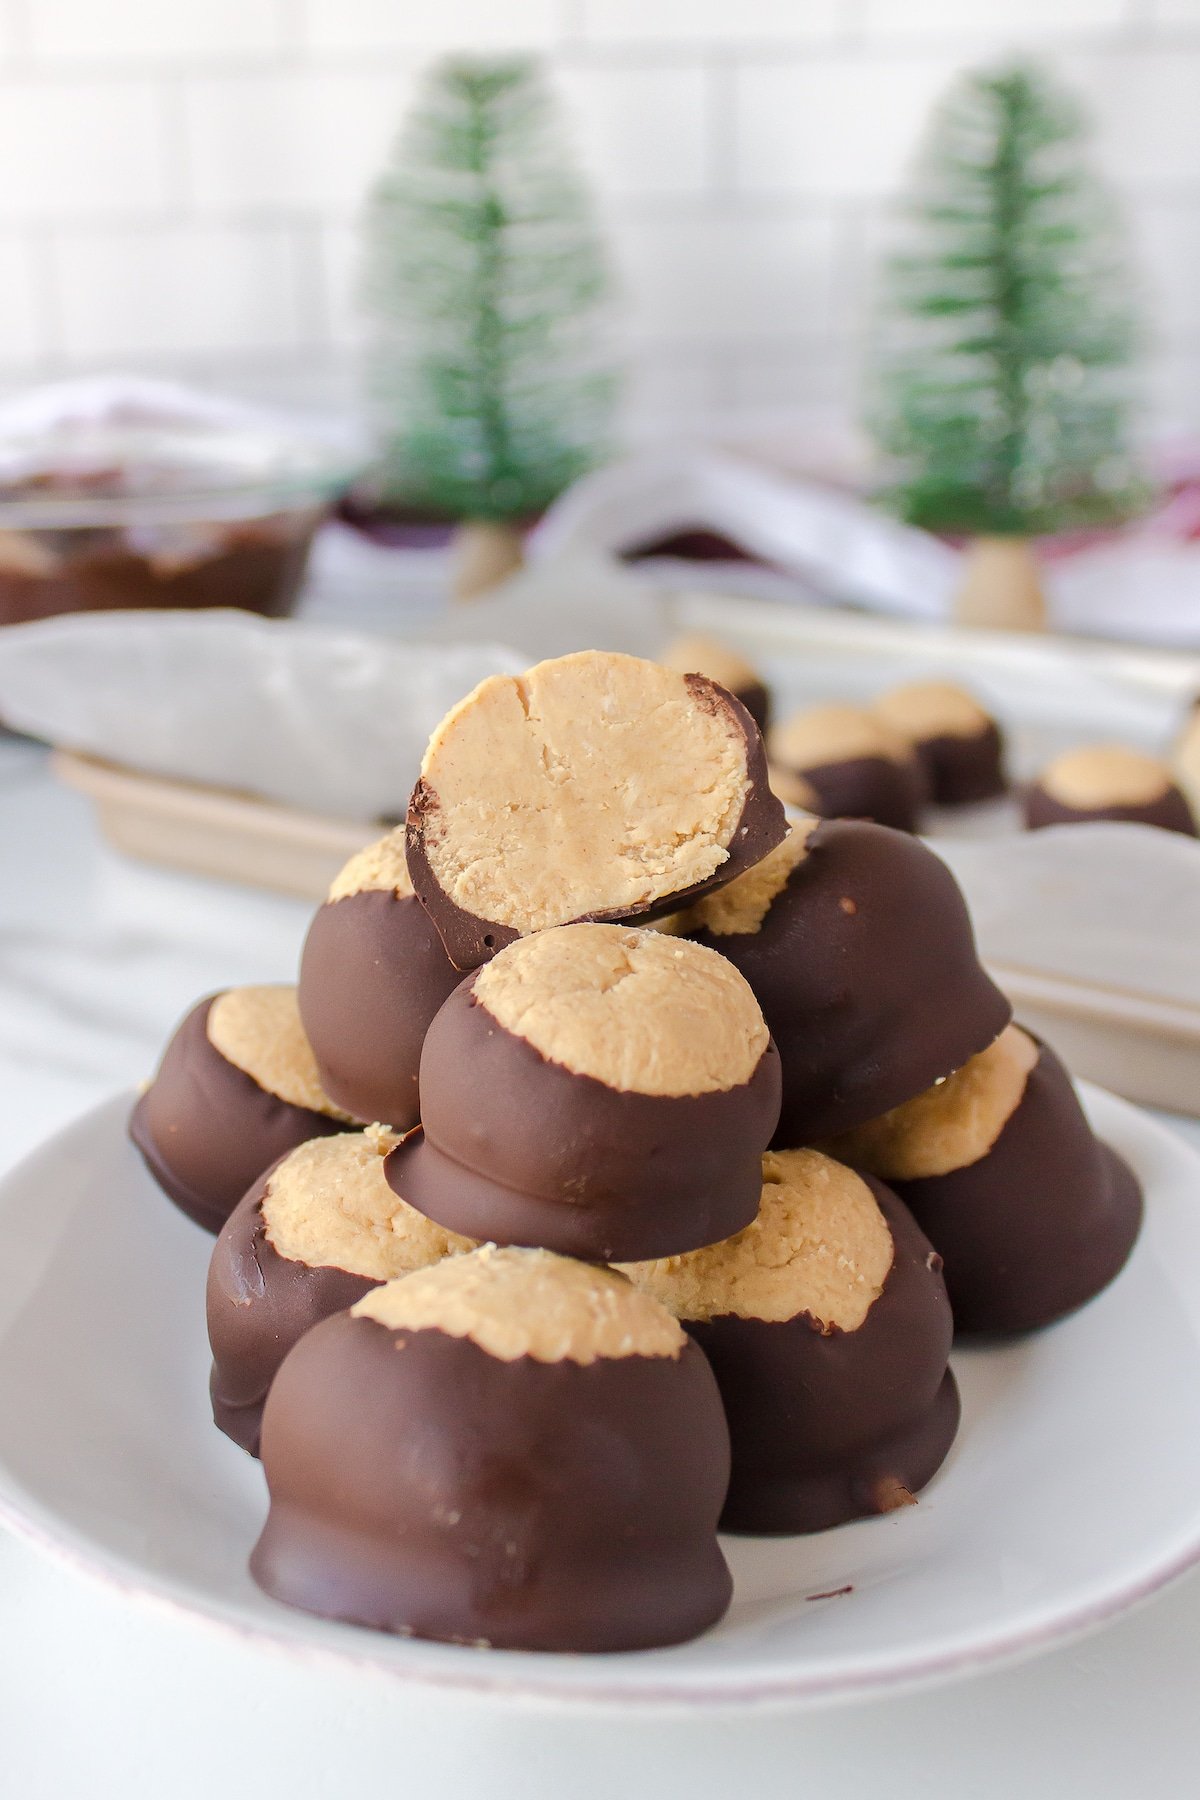 A neat stack of buckeye peanut butter balls, with the top buckeye cut in half to reveal the peanut butter center.